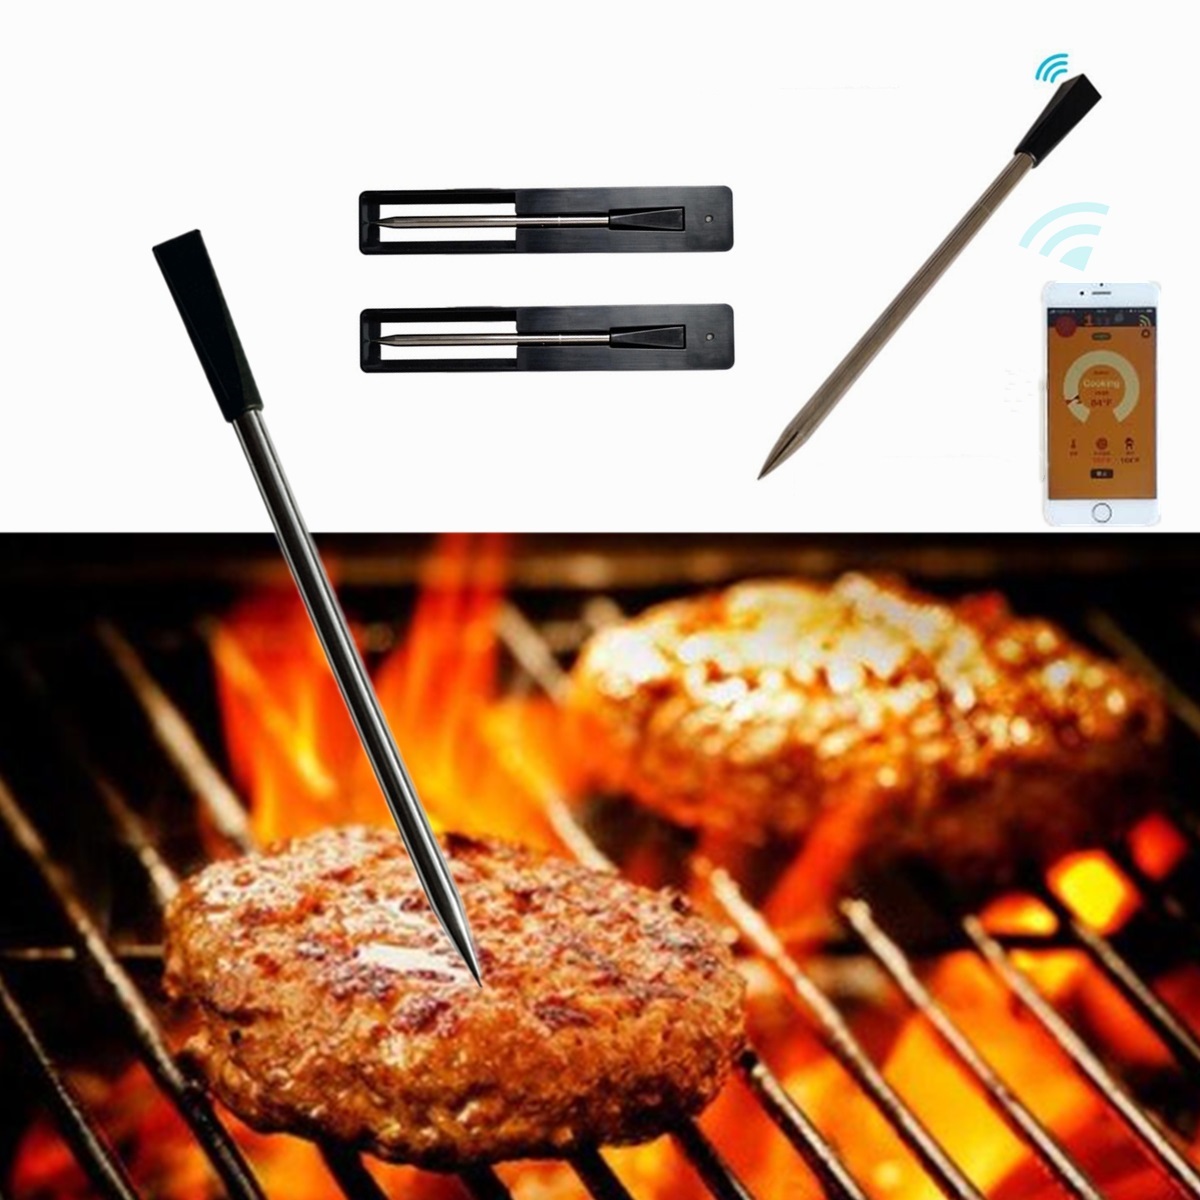 

Wireless bluetooth BBQ Food Meat Thermometer Probe For Food Oven Meat Grilling Digital Thermometer